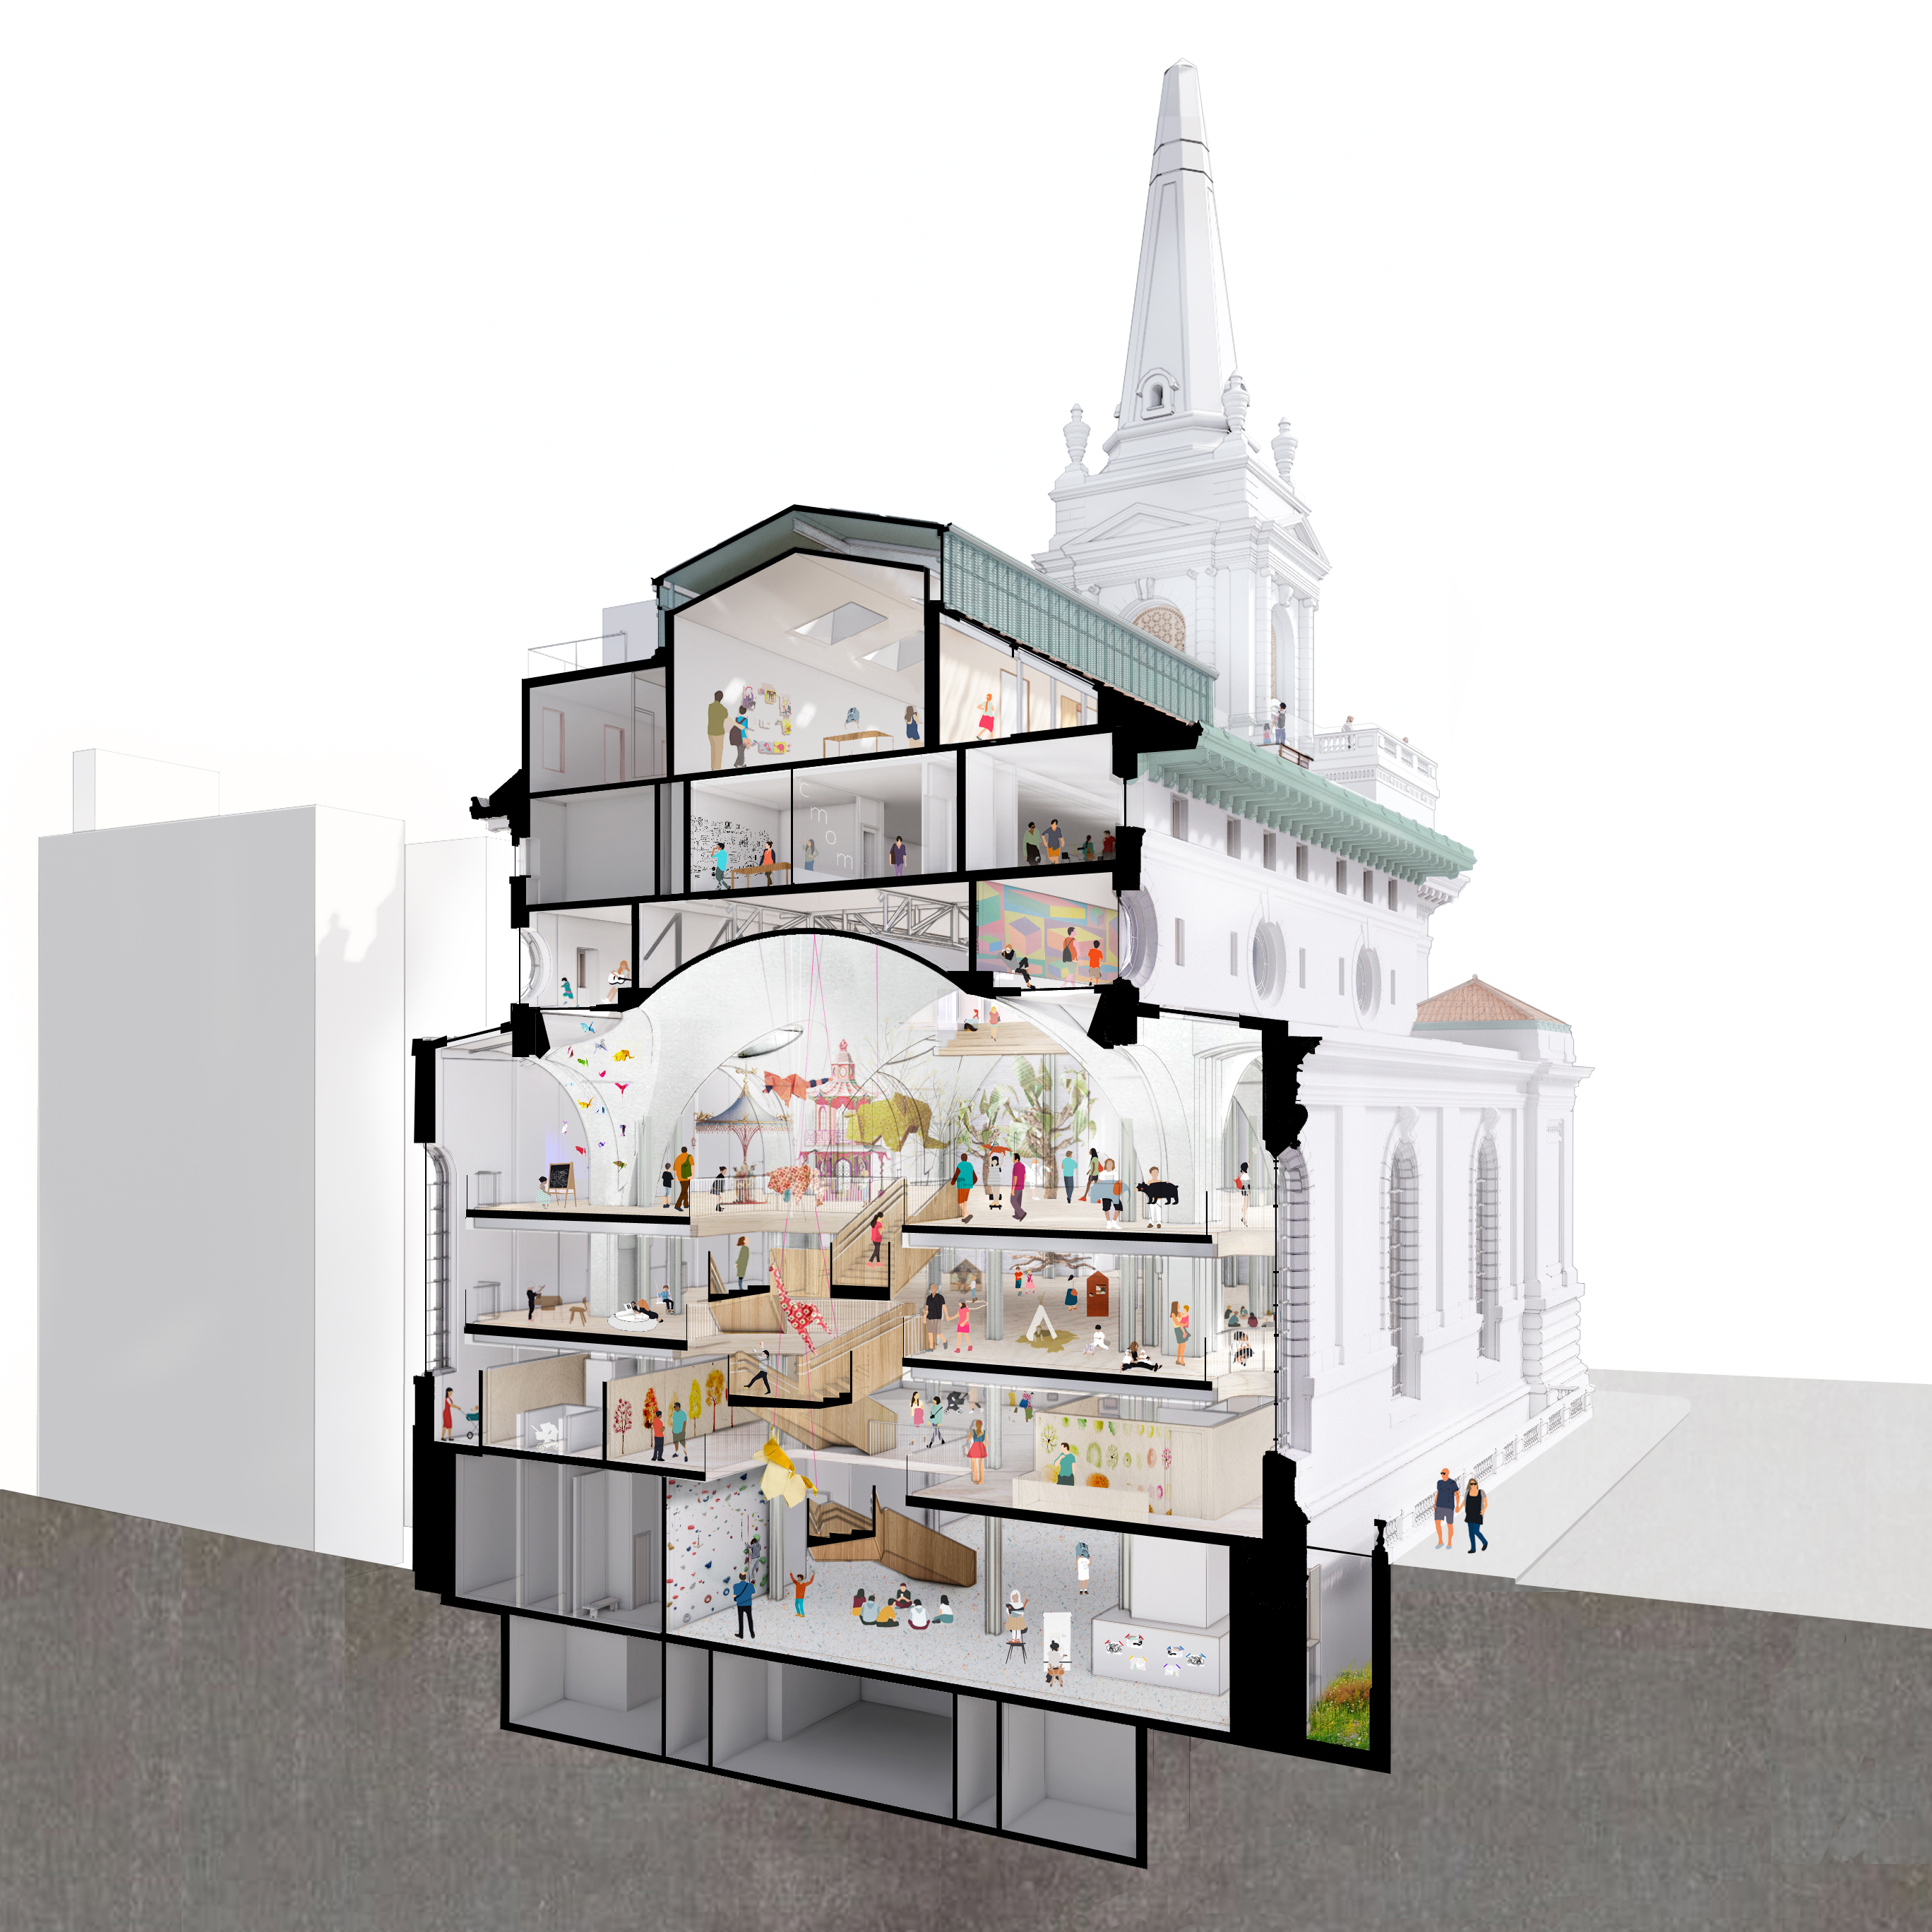 Rendering of the Children’s Museum of Manhattan cut in half with circulation exposed